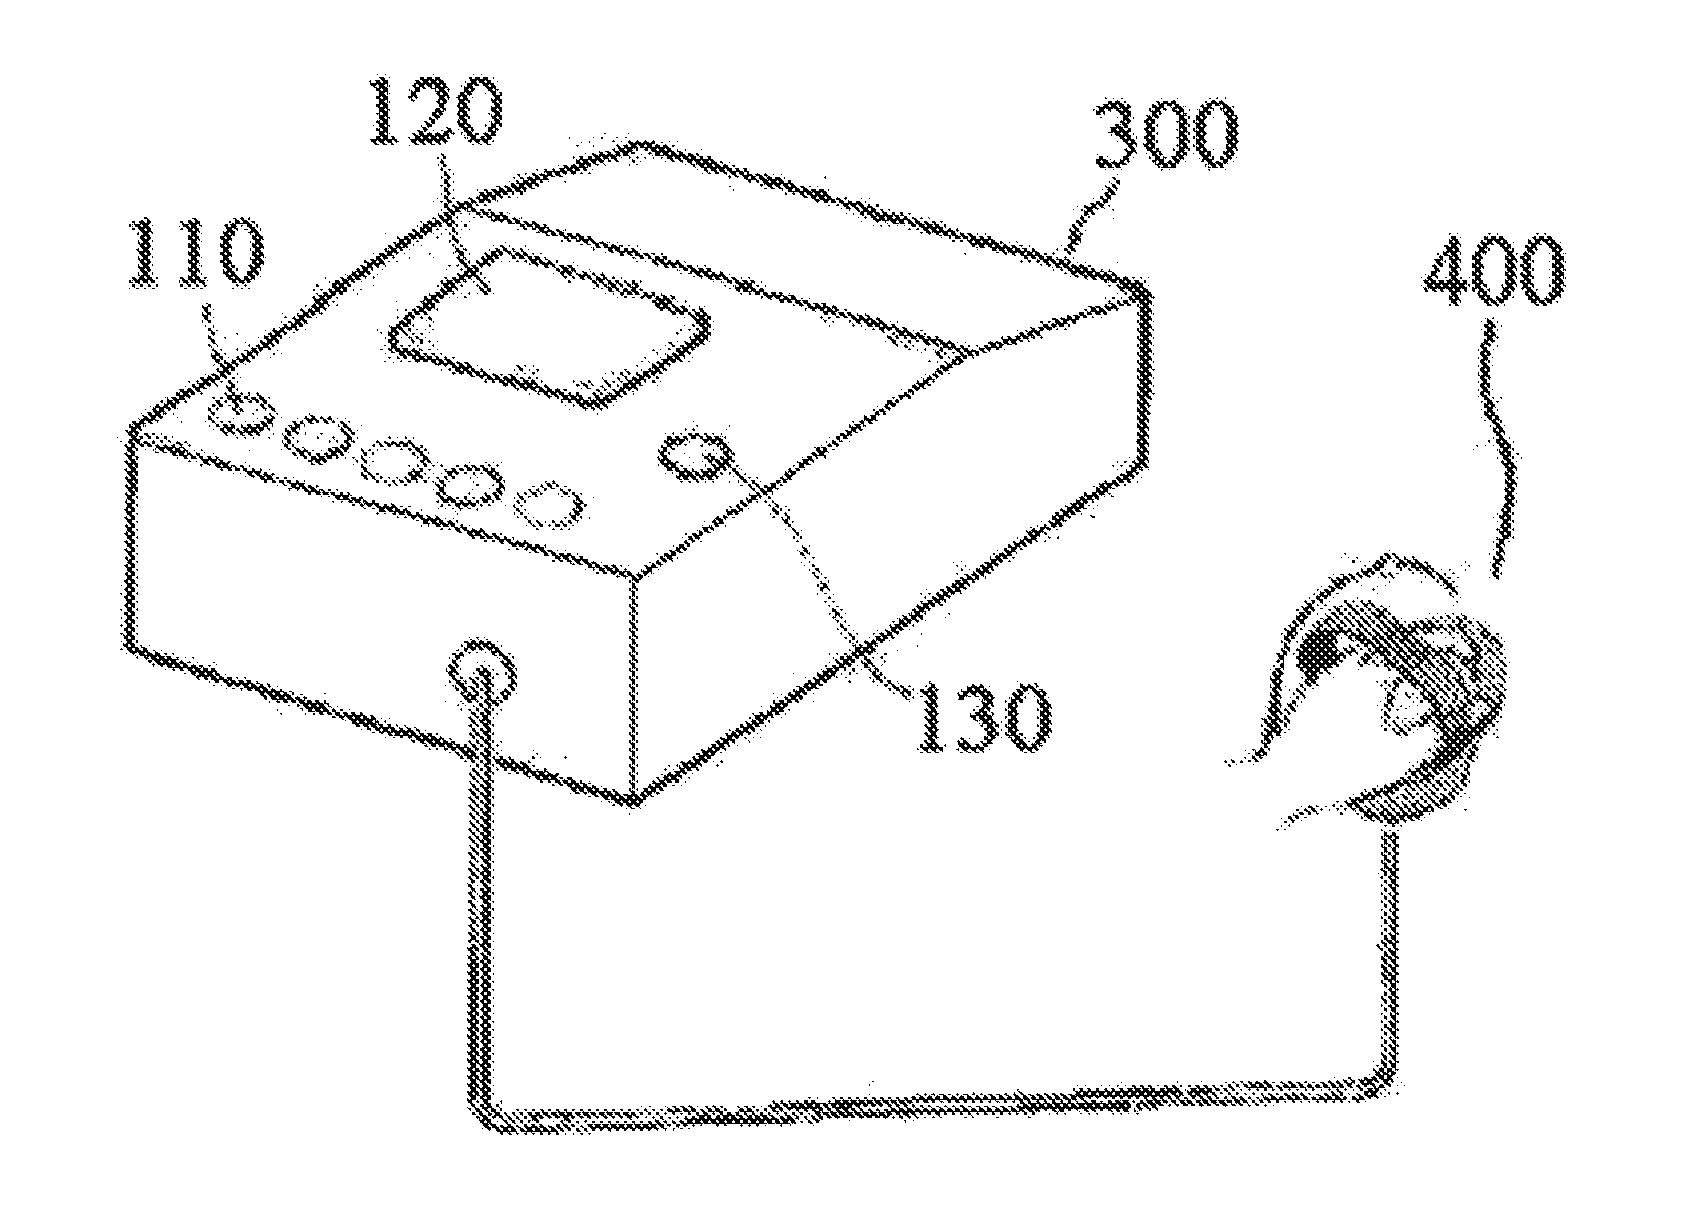 Ultrasound equipment for treating of edema and use thereof